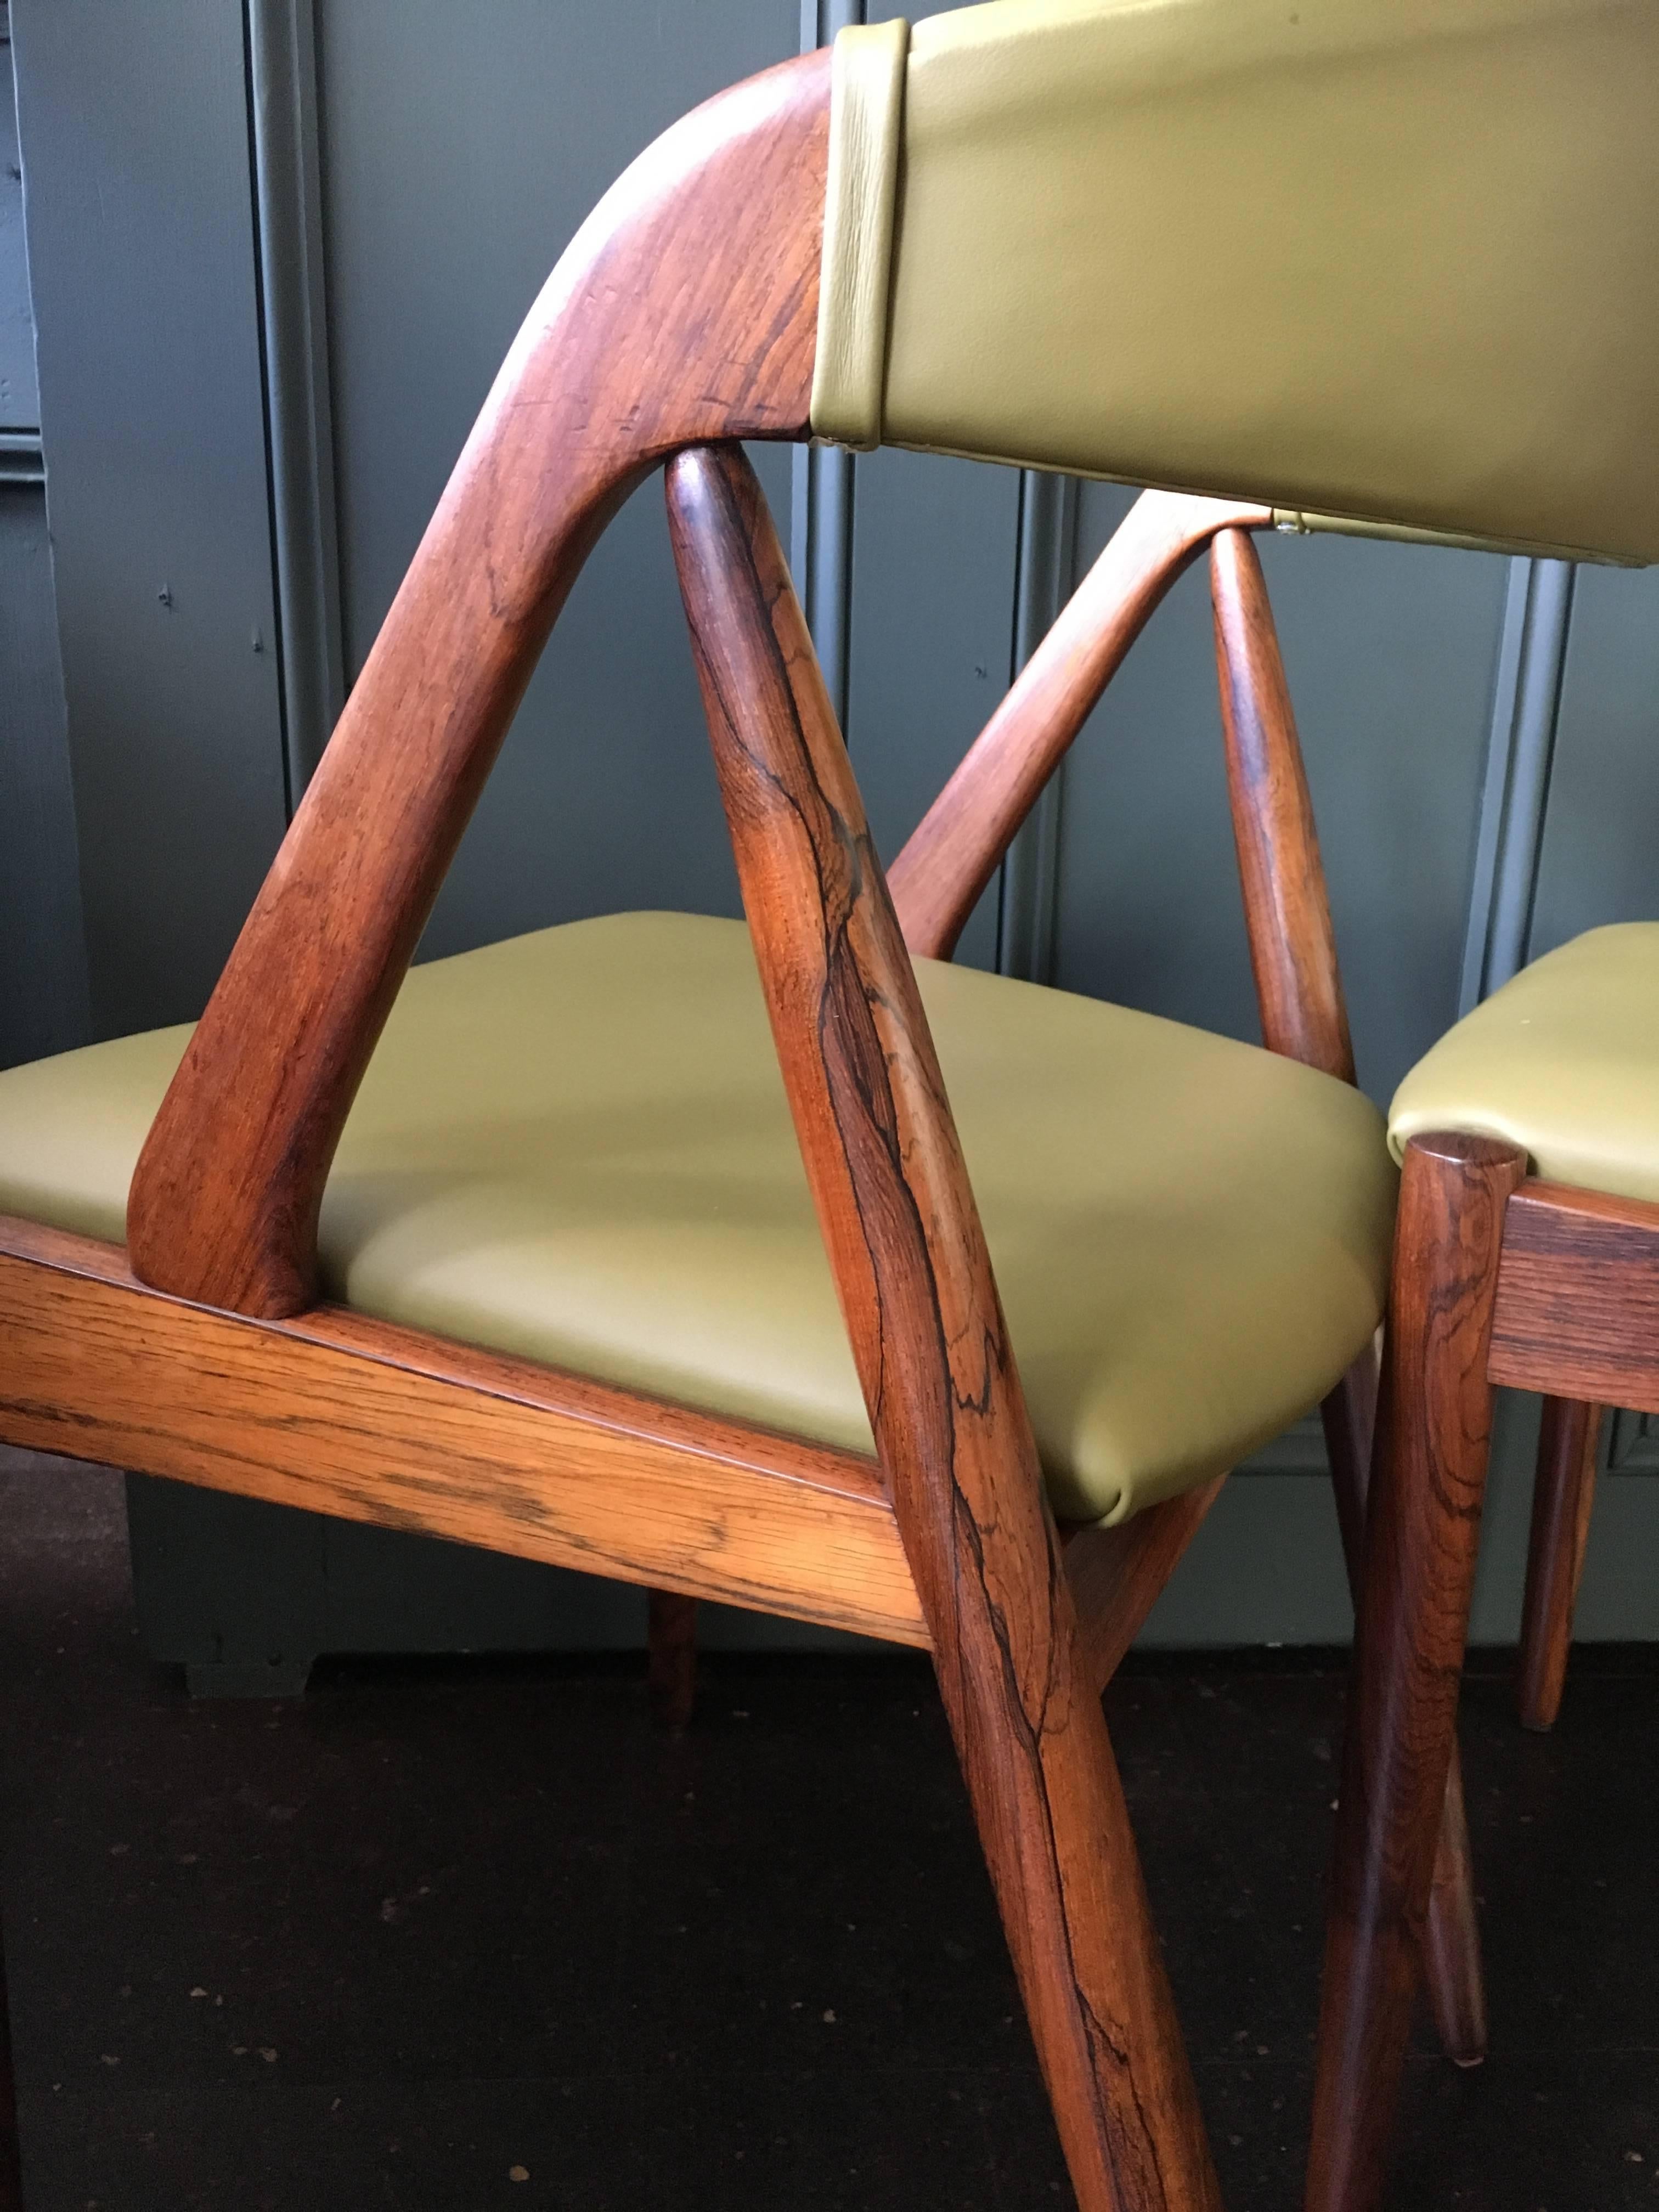 Set of 10. Refurbished and fully re-upholstered classic Kai Kristiansen model 31 dining chairs, Denmark, 1960.
Superb new Italian olive leather upholstery to contrast the beautifully grained Rosewood frames.
We currently have more of these in stock